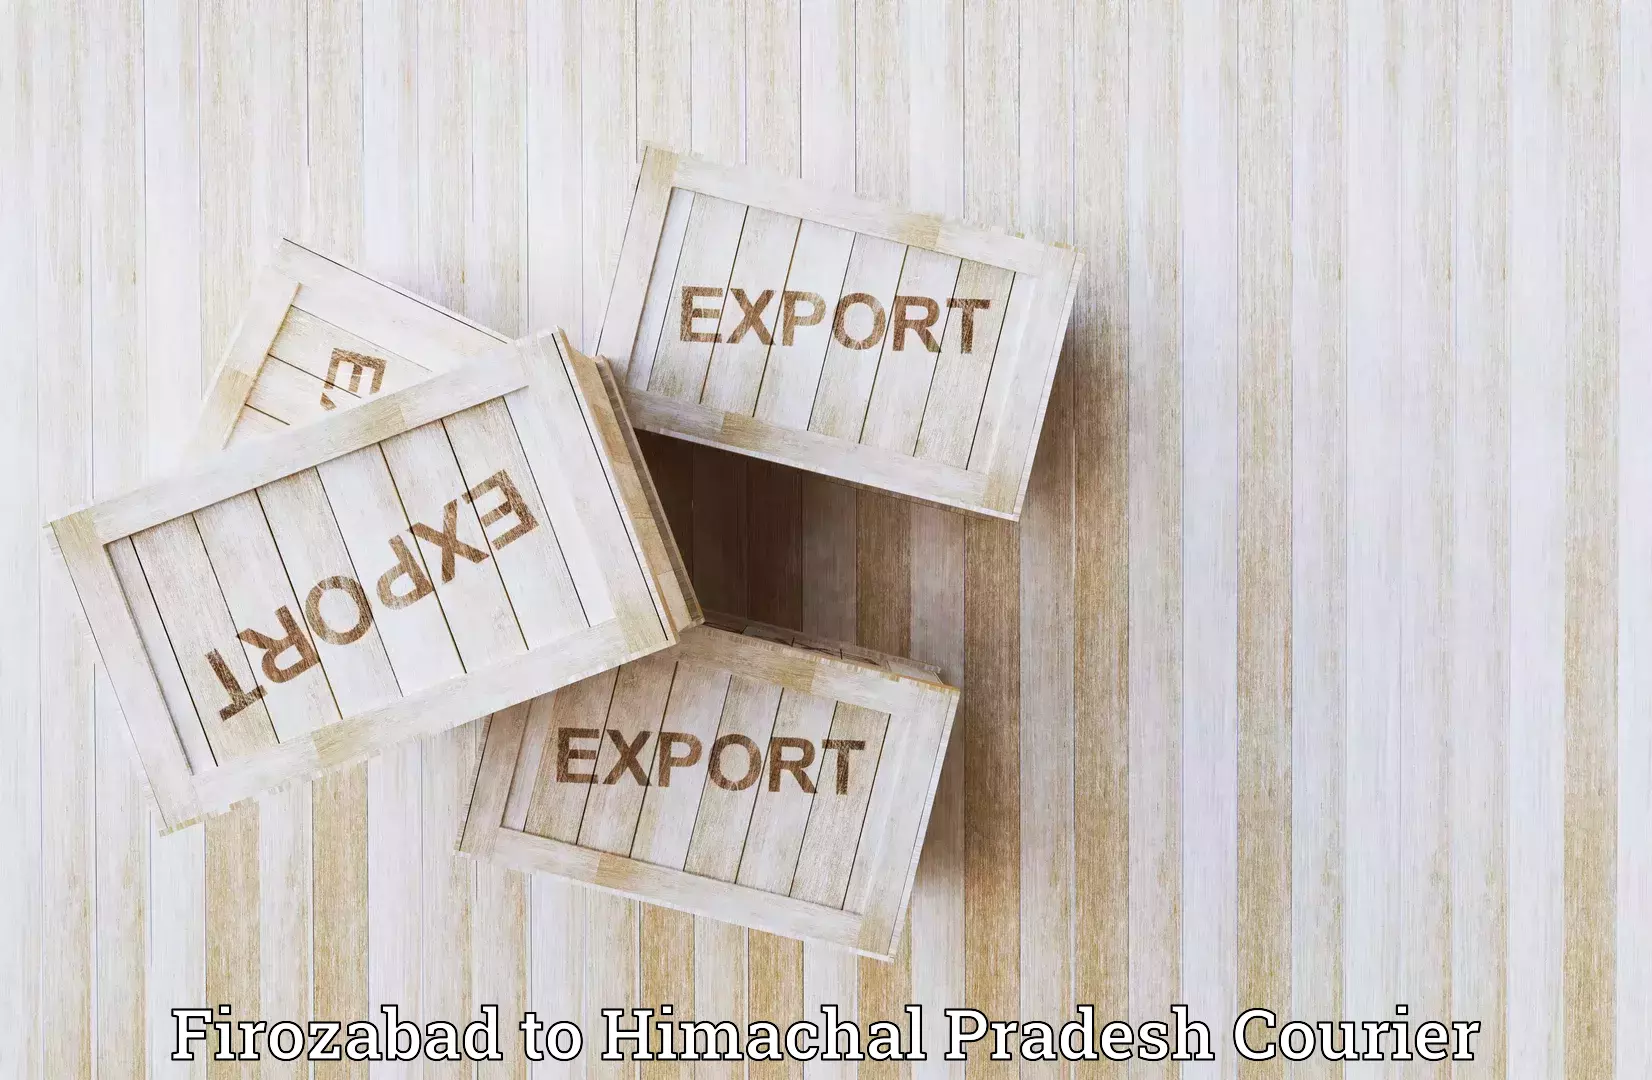 Efficient shipping operations Firozabad to Sandhol